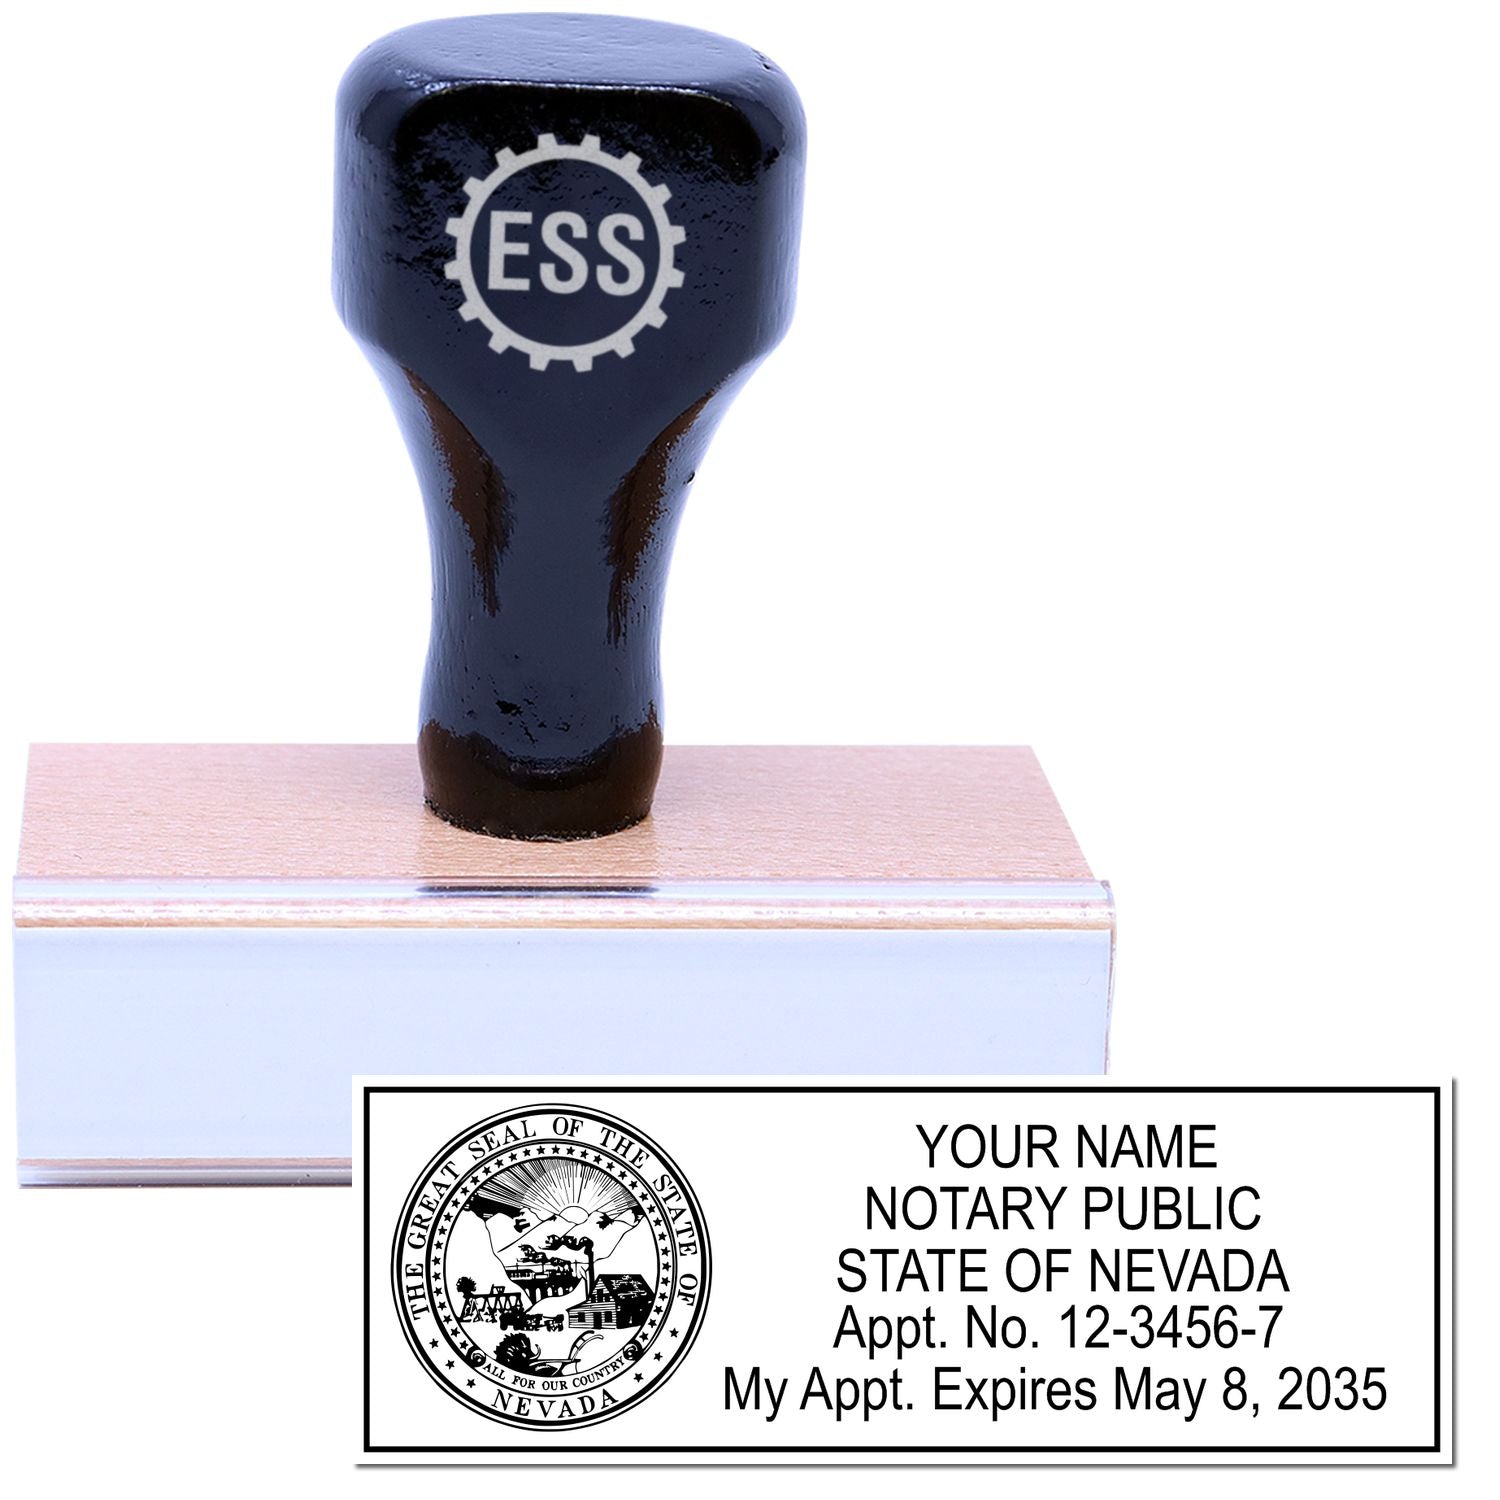 The main image for the Wooden Handle Nevada State Seal Notary Public Stamp depicting a sample of the imprint and electronic files